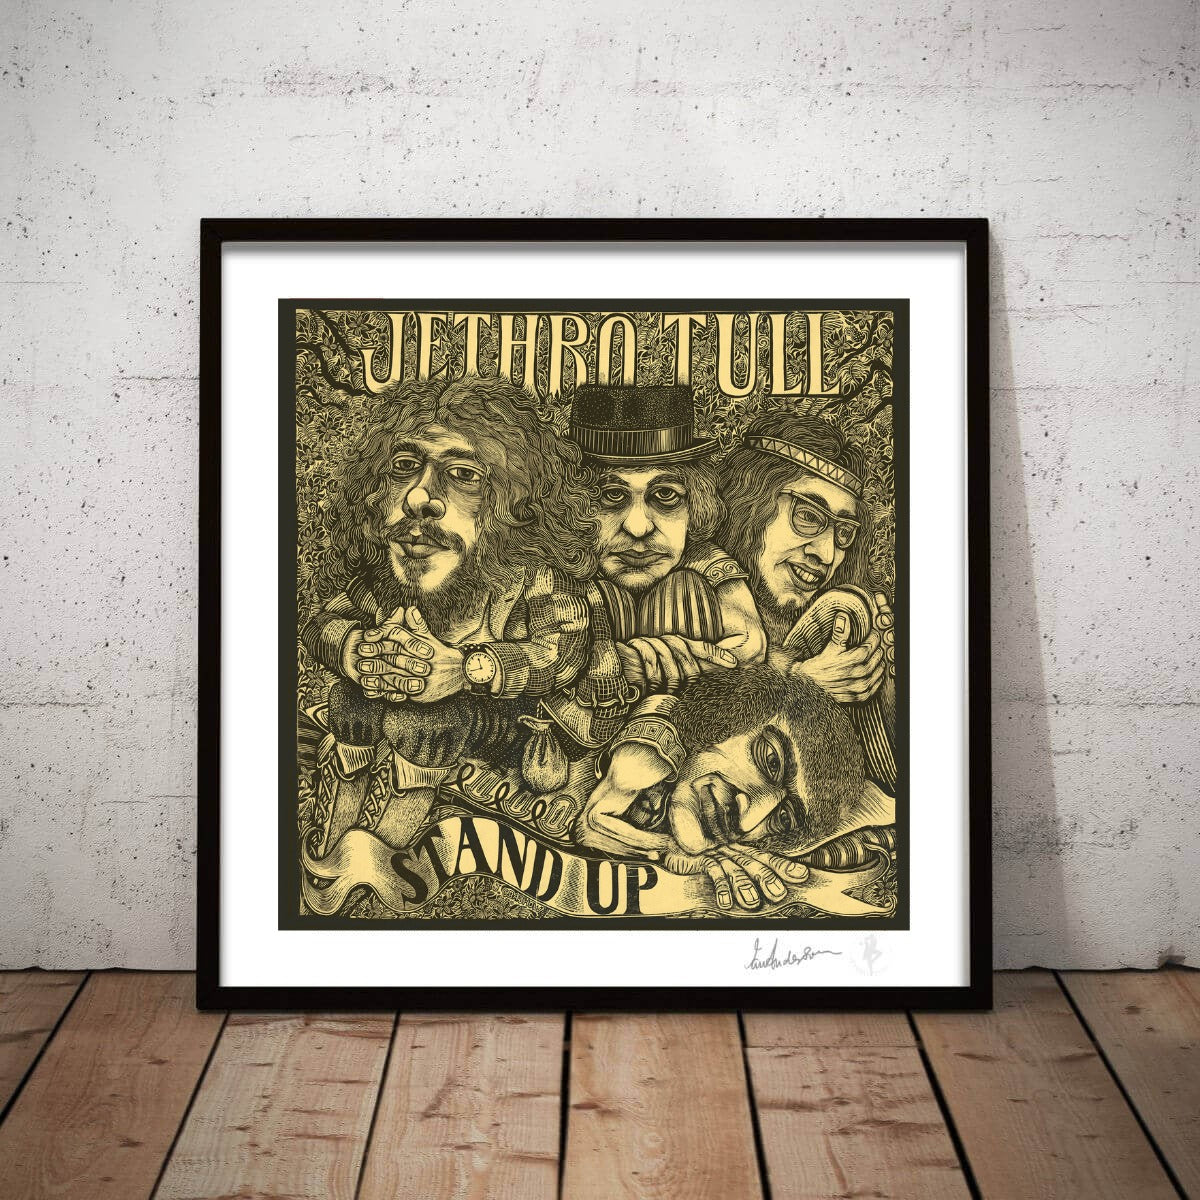 Jethro Tull: Stand Up 24 Limited Giclee Print (signed) – Jethro Tull Art